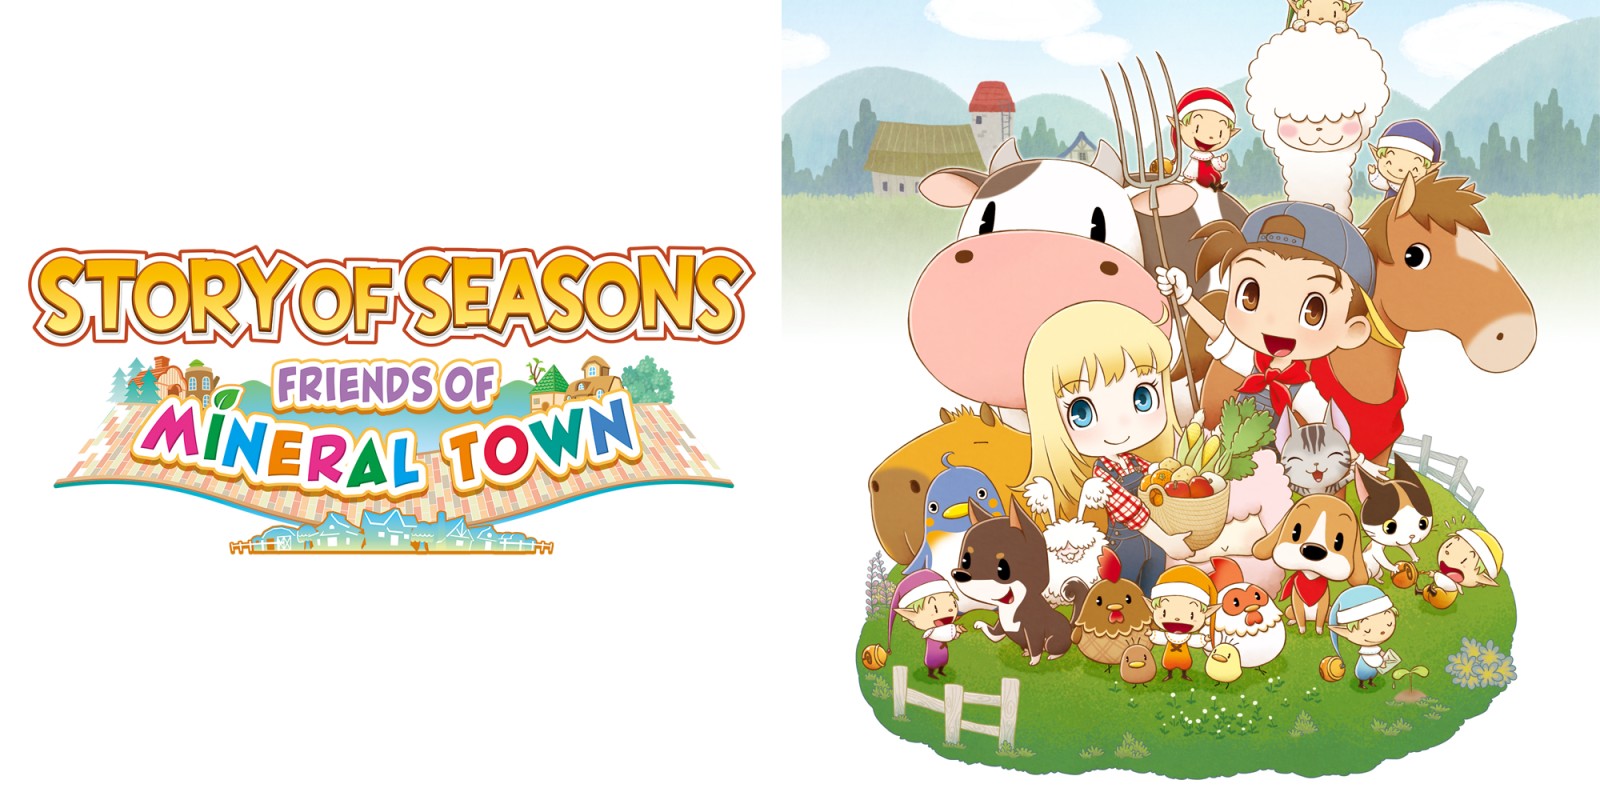 , “Story of Seasons: Friends of Mineral Town” (Nintendo Switch) | Análise Gaming